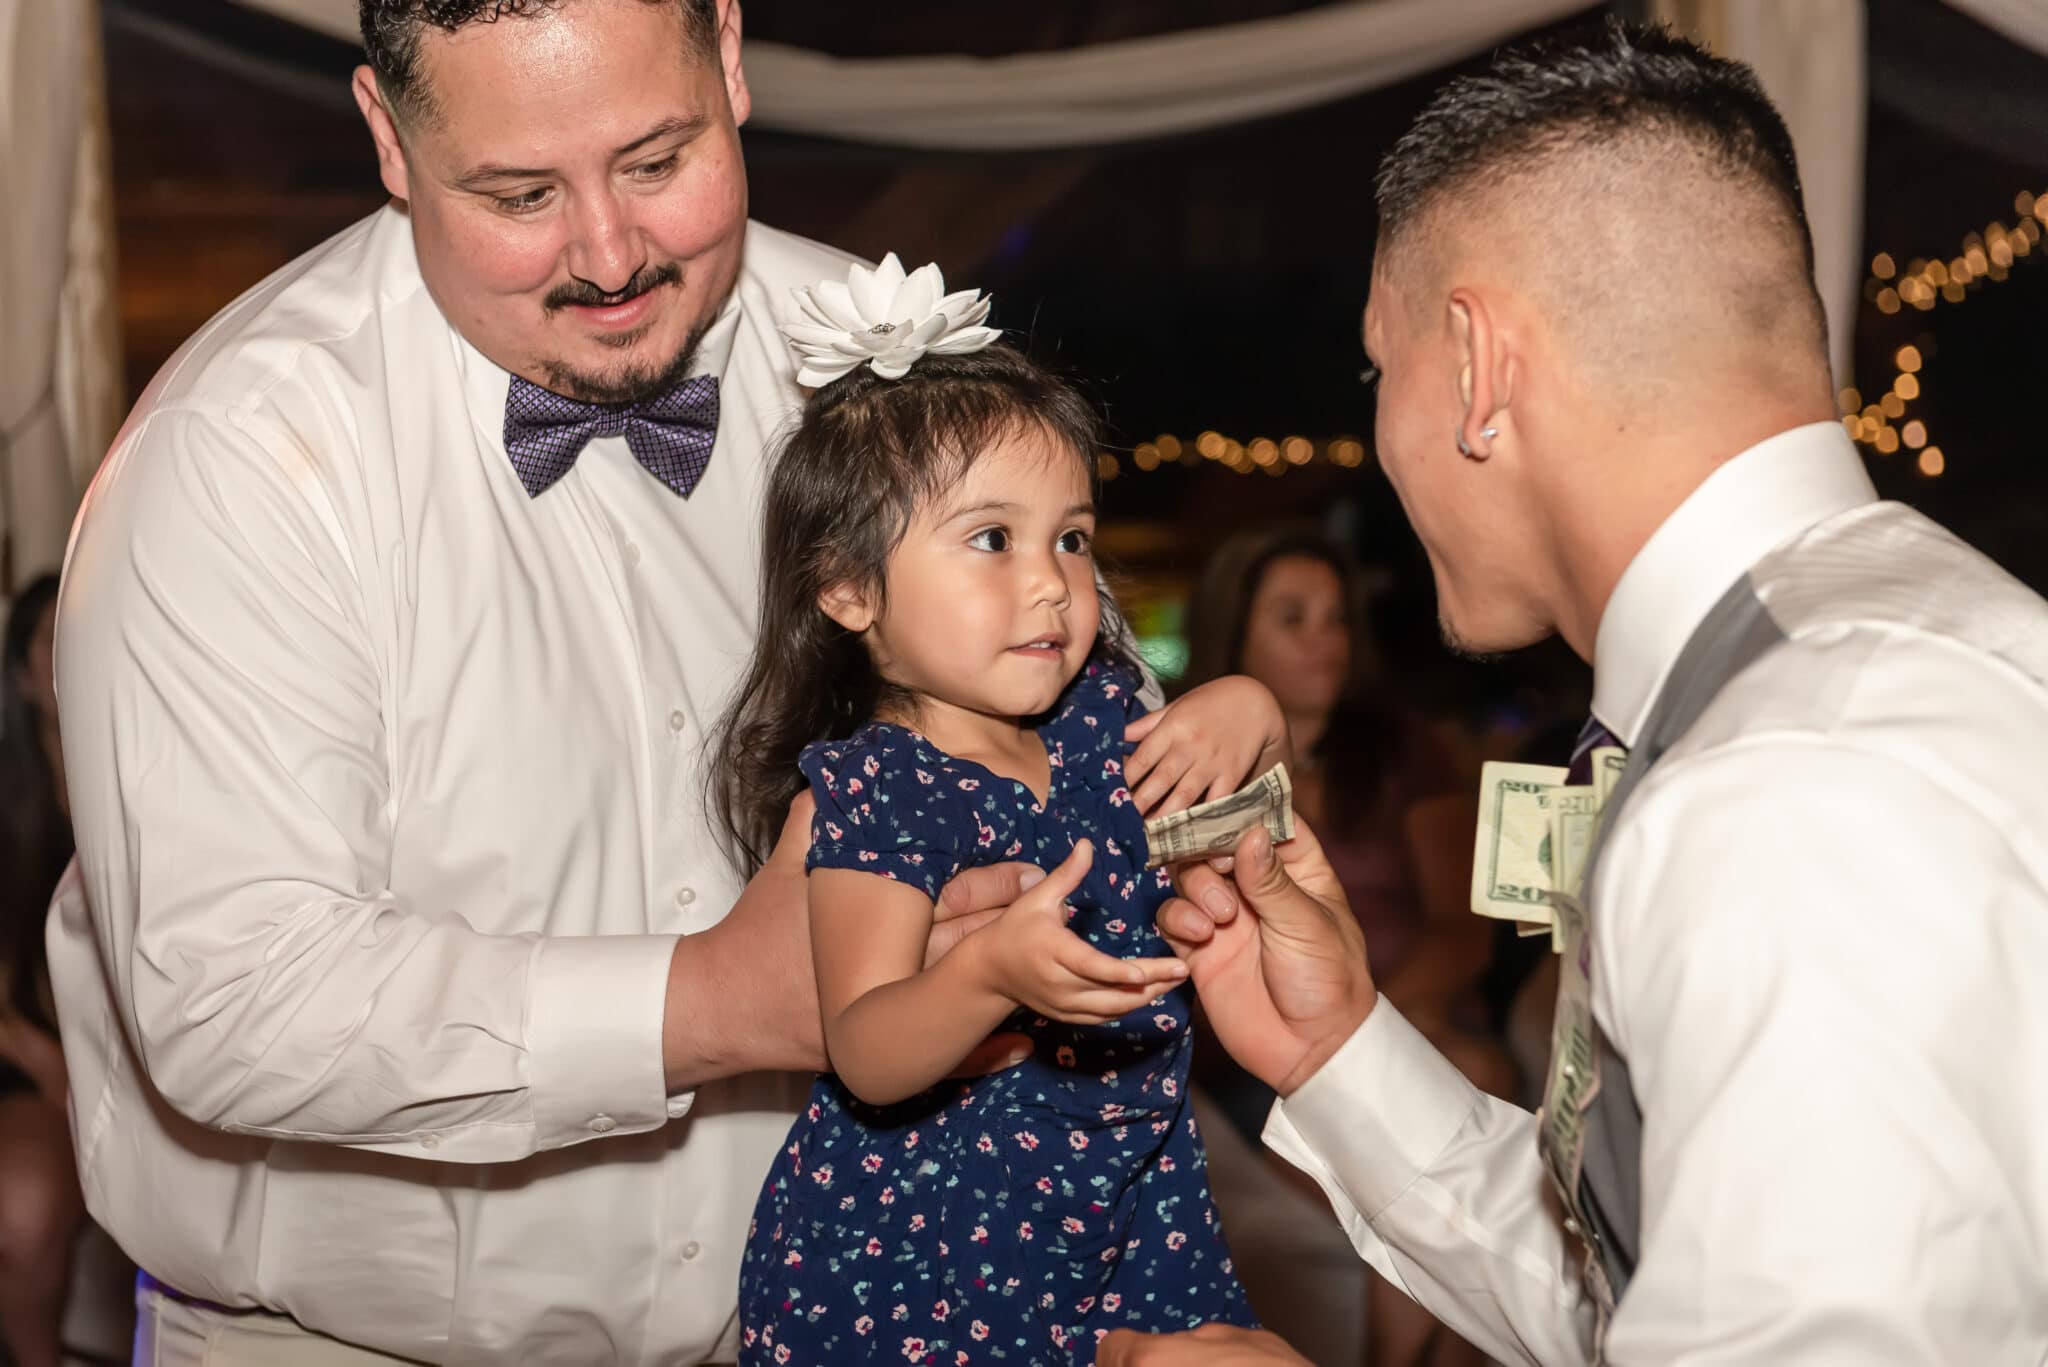 A young girl gives the groom cash for the traditional money dance at a wedding reception.